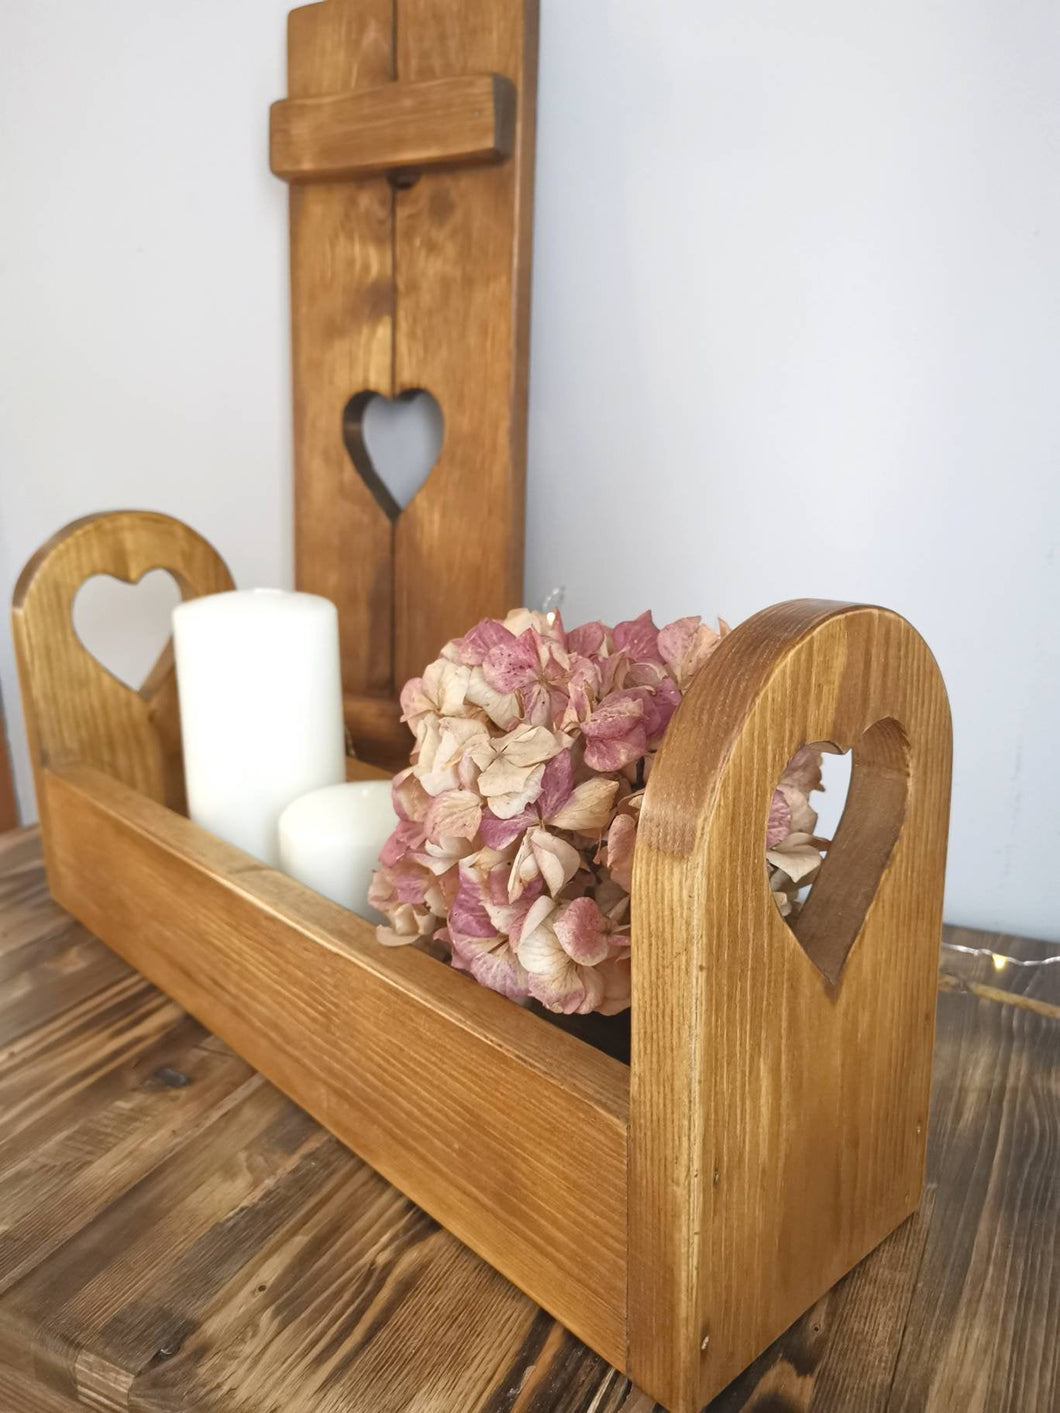 Wooden Trug, Wooden storage Crate, Table centrepiece, candle display, table decor, table display